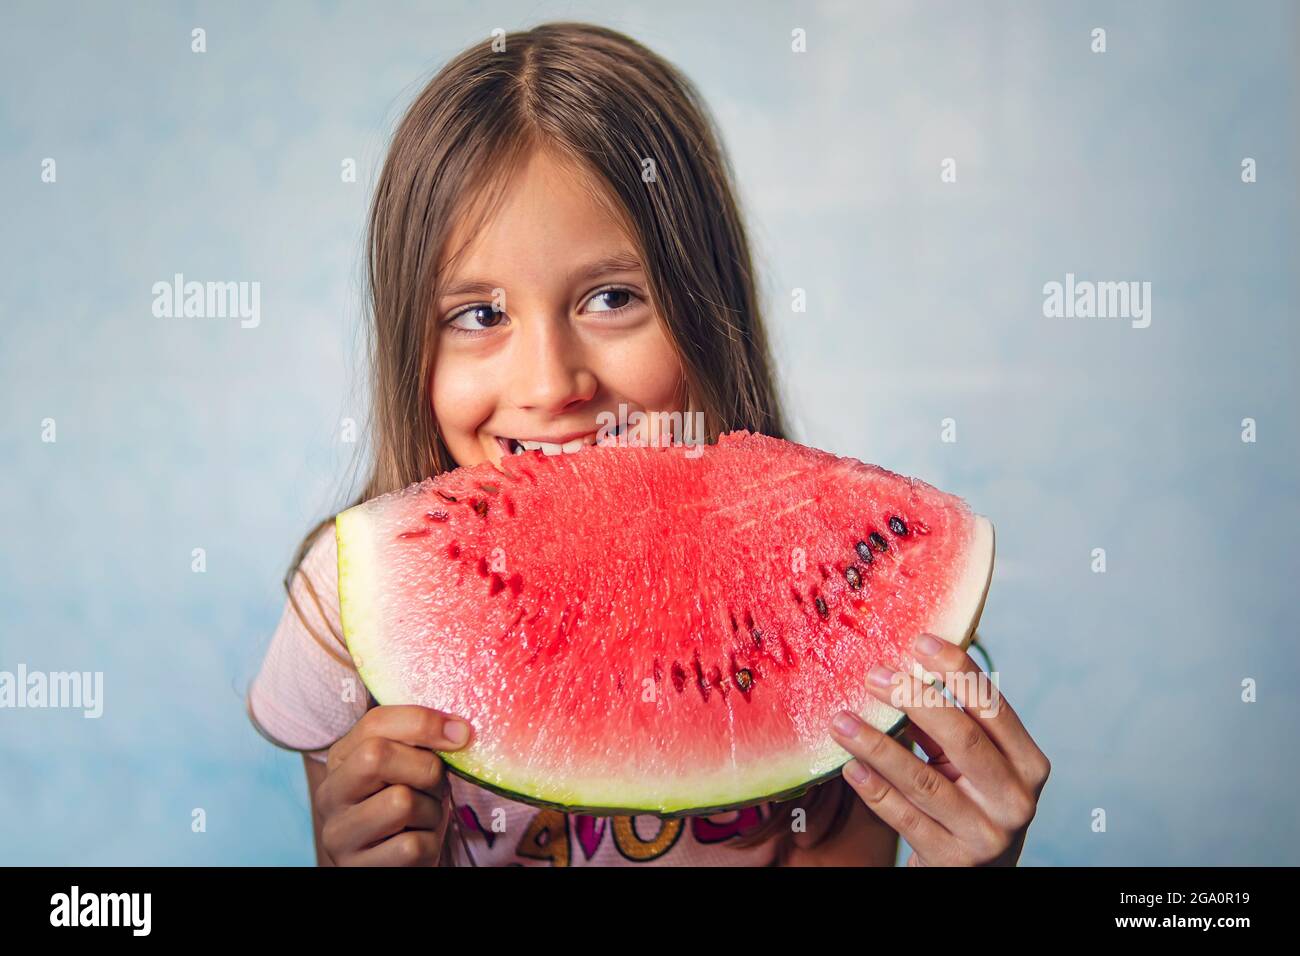 Happy toddler eating melon. A little girl child bites a large piece of watermelon on a blue background. Stock Photo